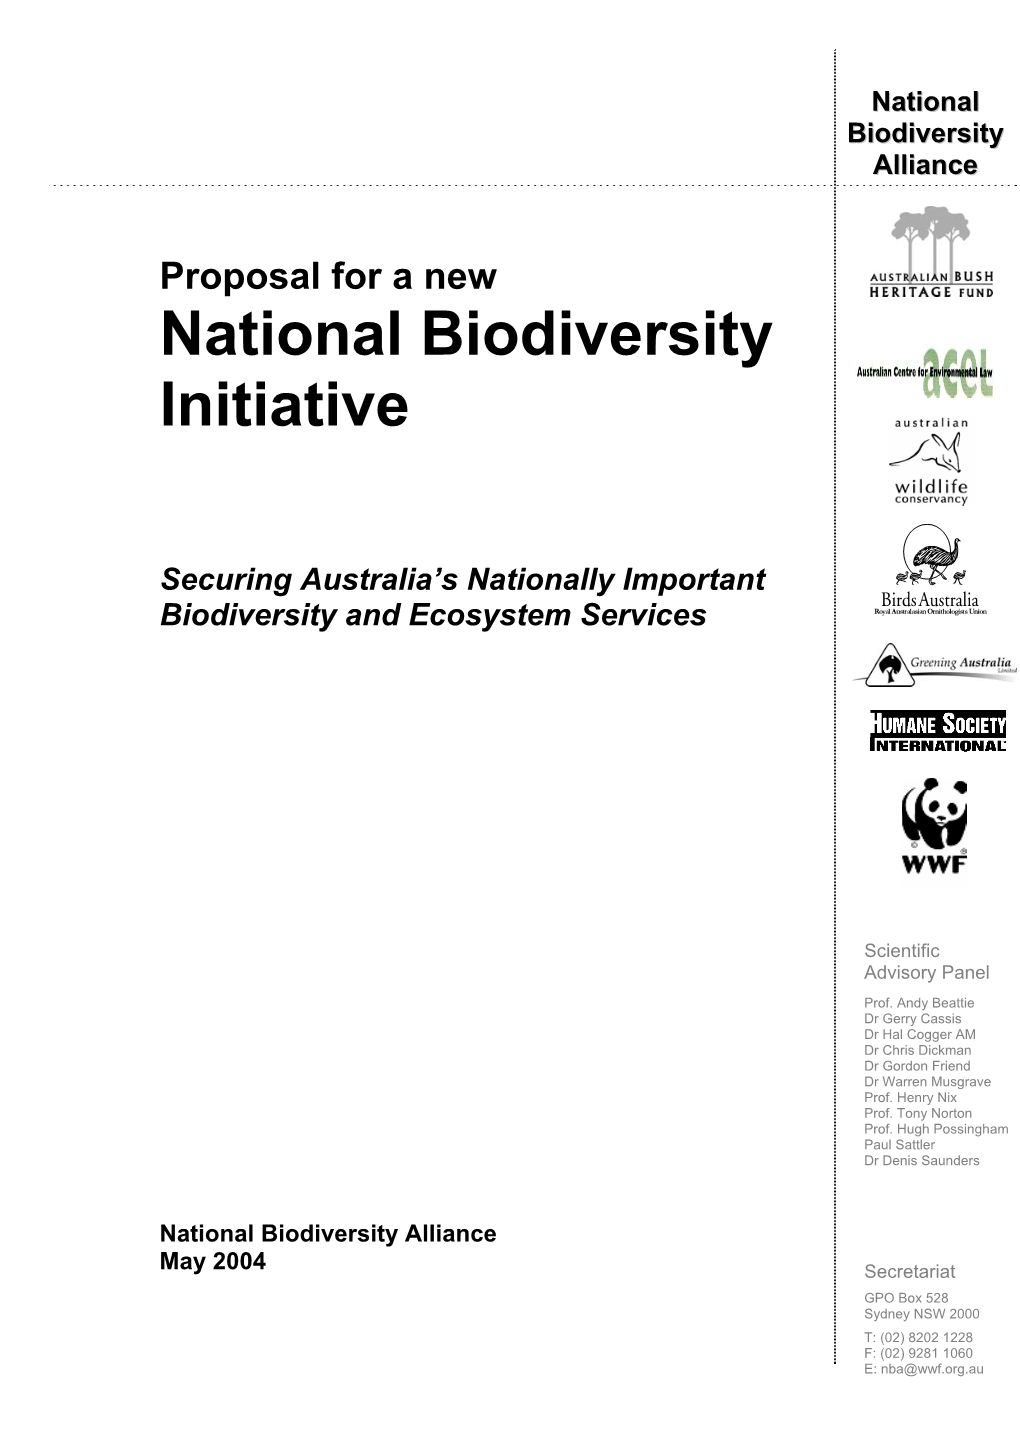 Proposal for a New National Biodiversity Initiative